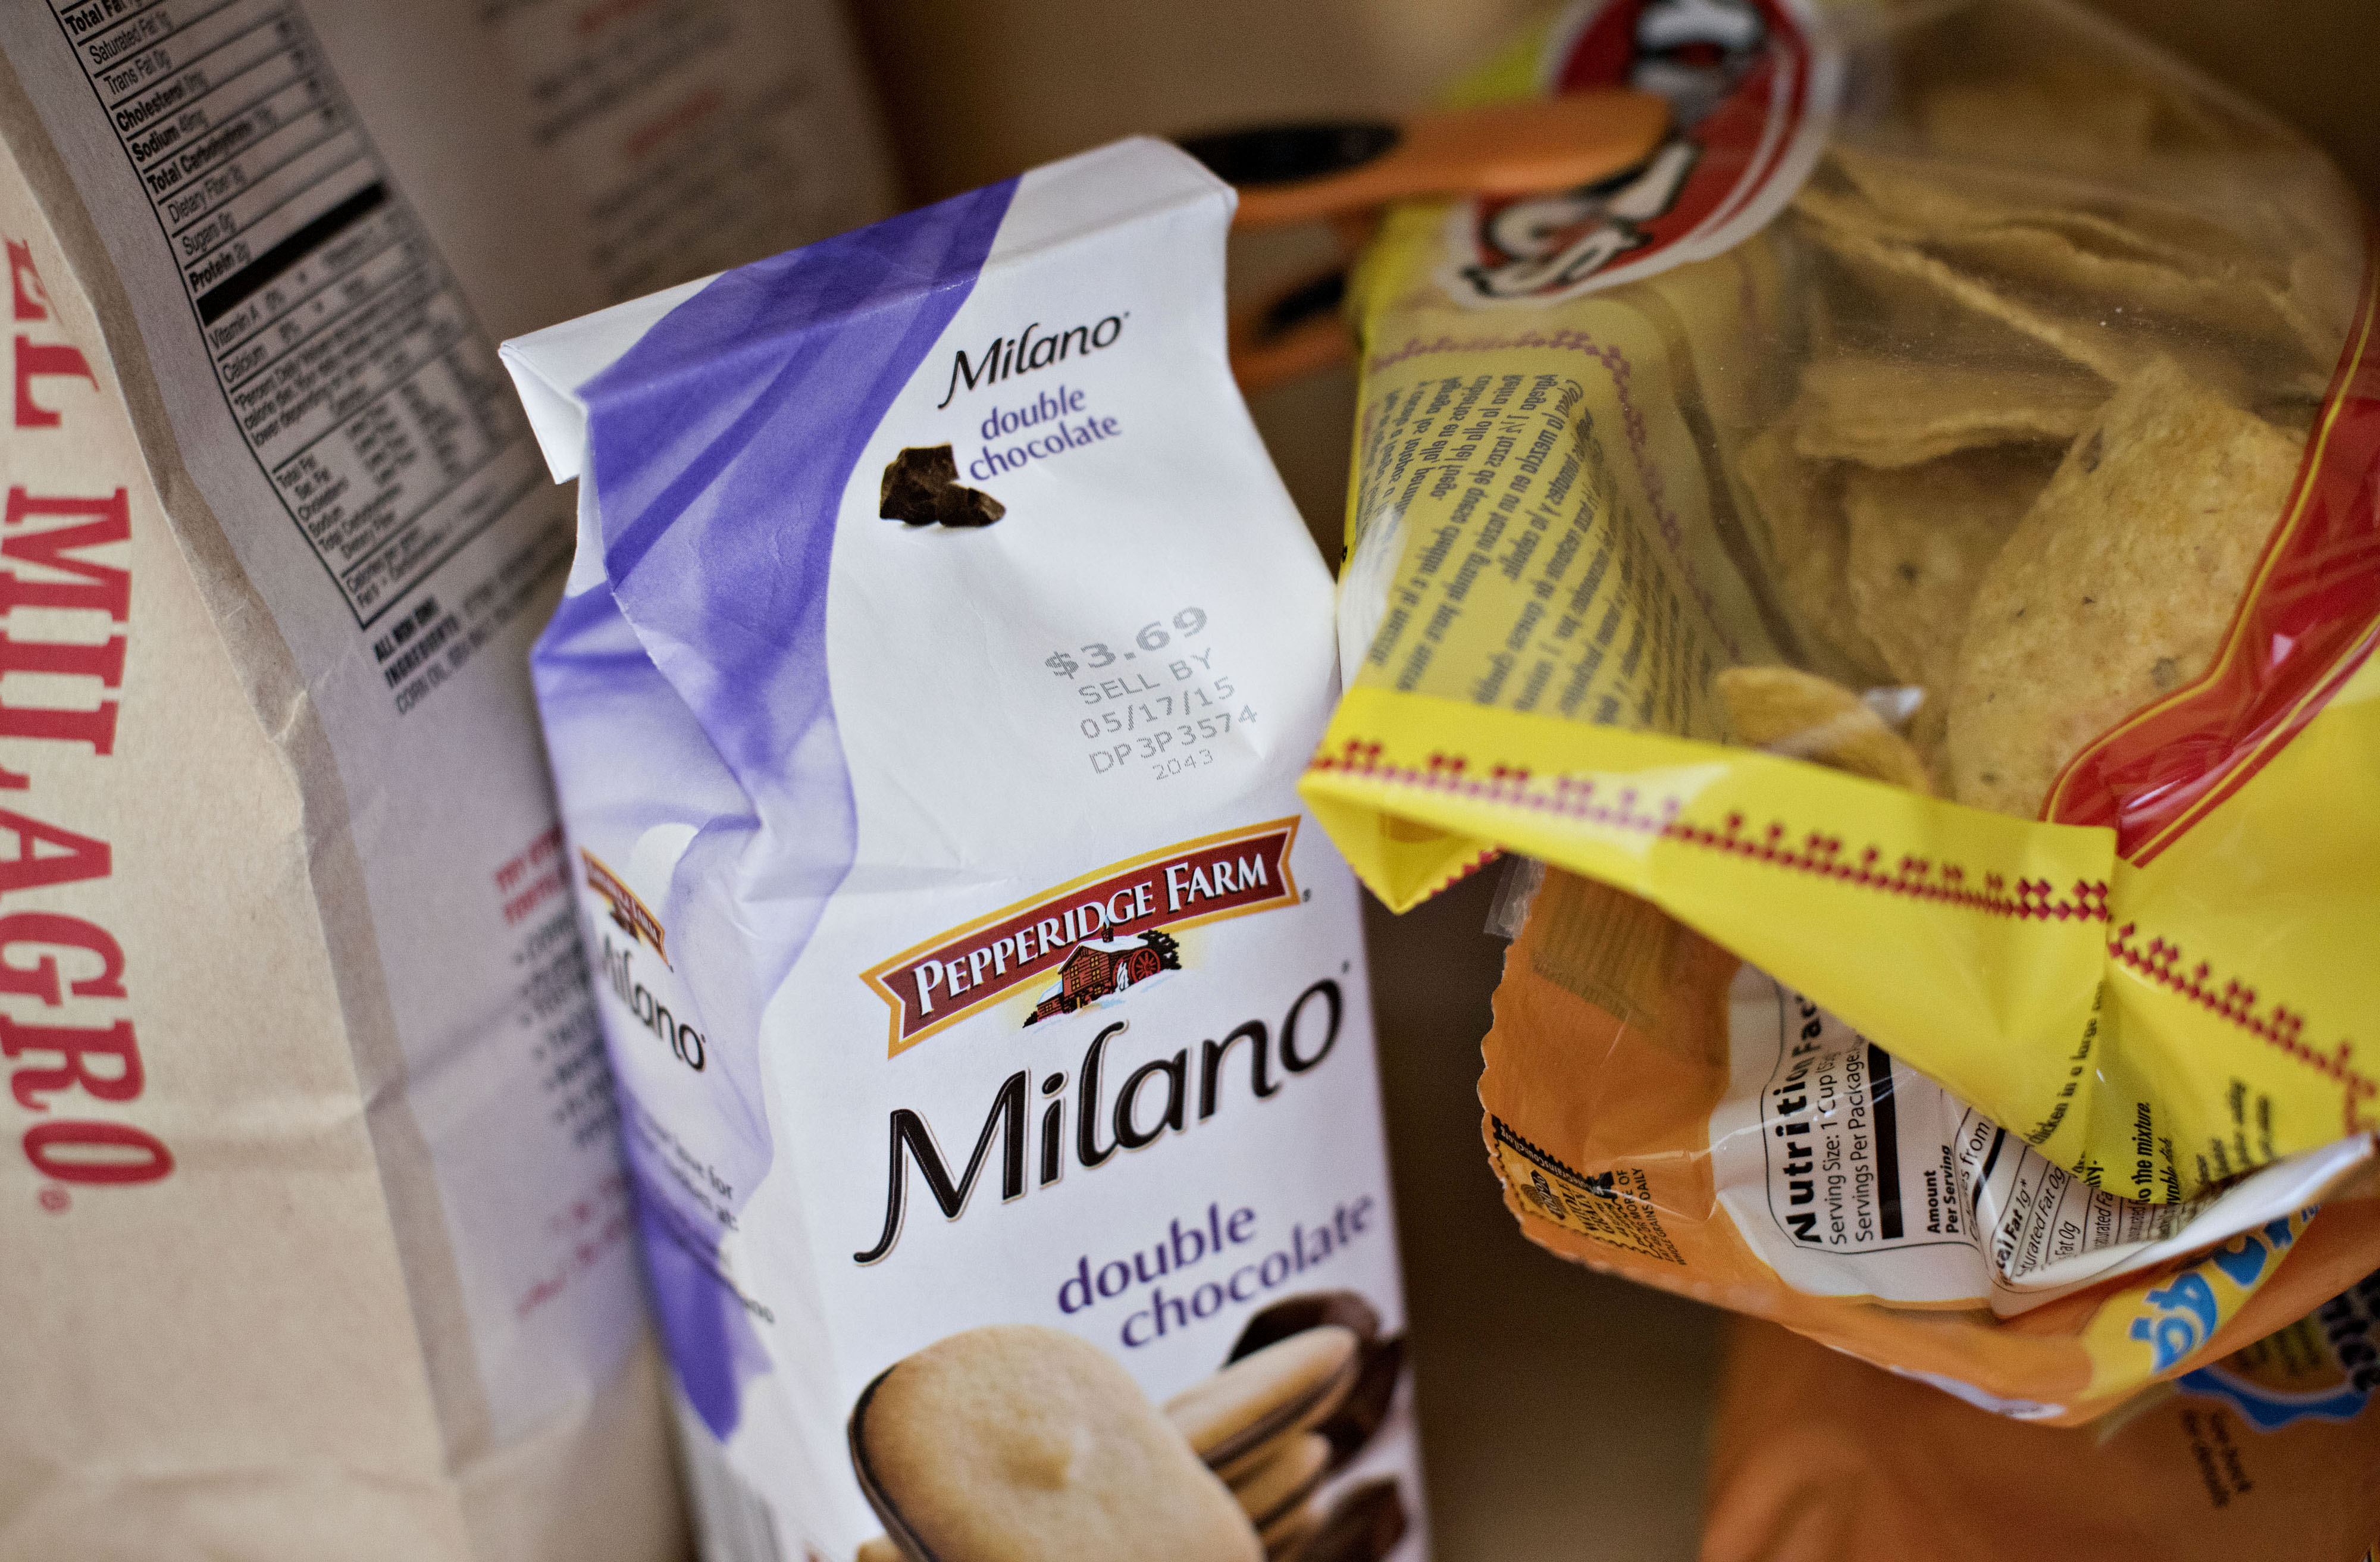 Pepperidge Farm's Milano cookies in Tiskilwa, IL on Feb. 24, 2015. (Bloomberg—Getty Images)